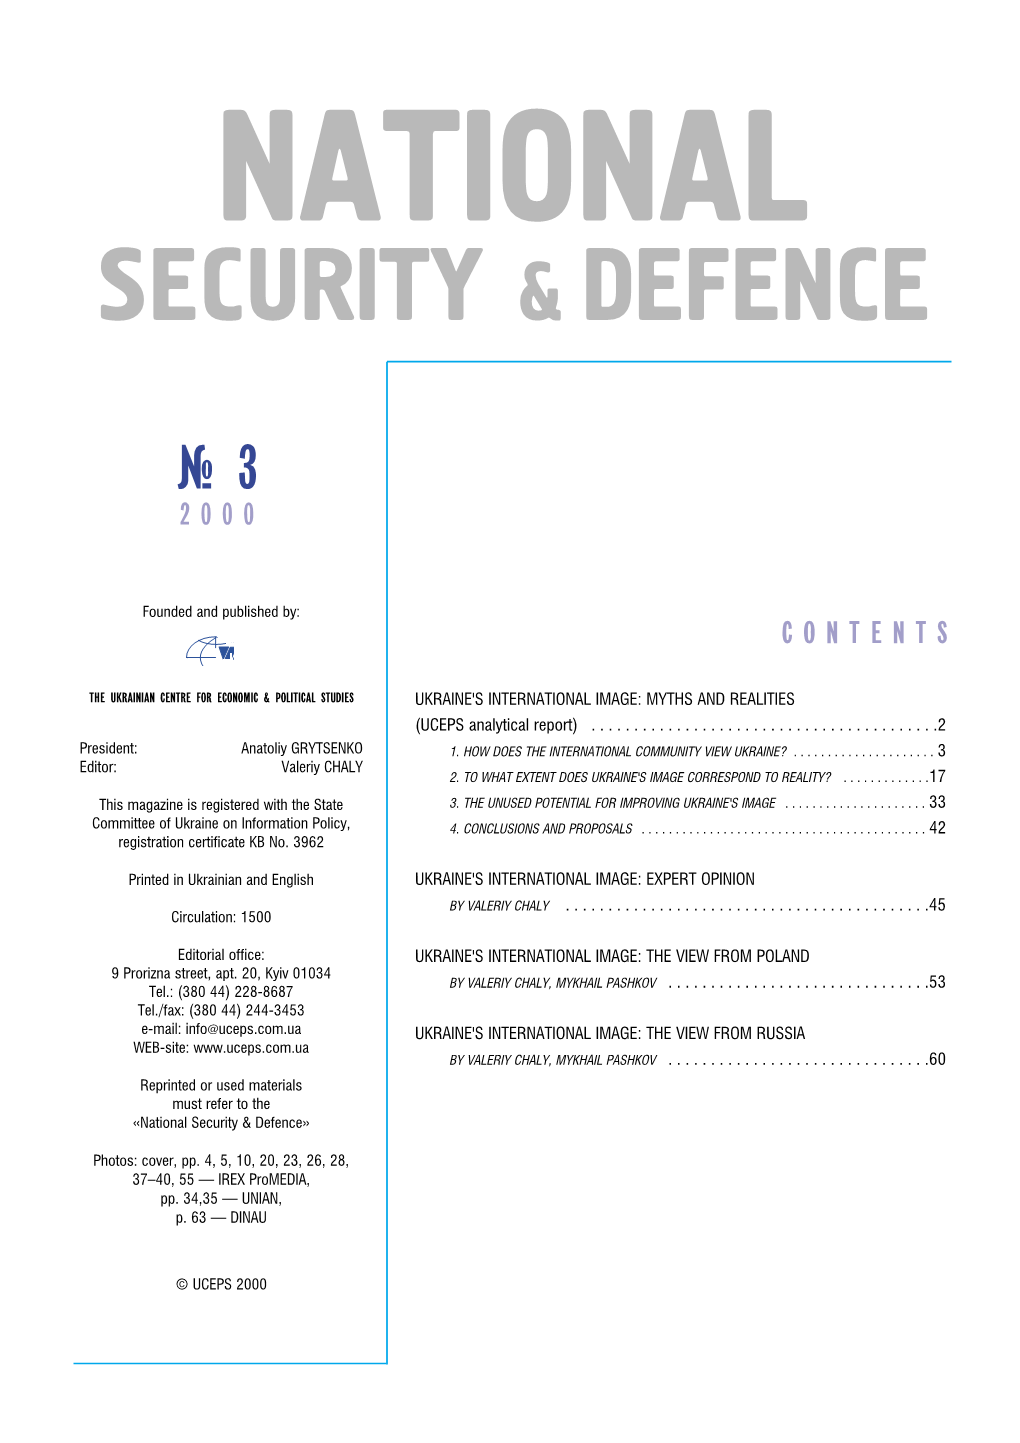 Security & Defence